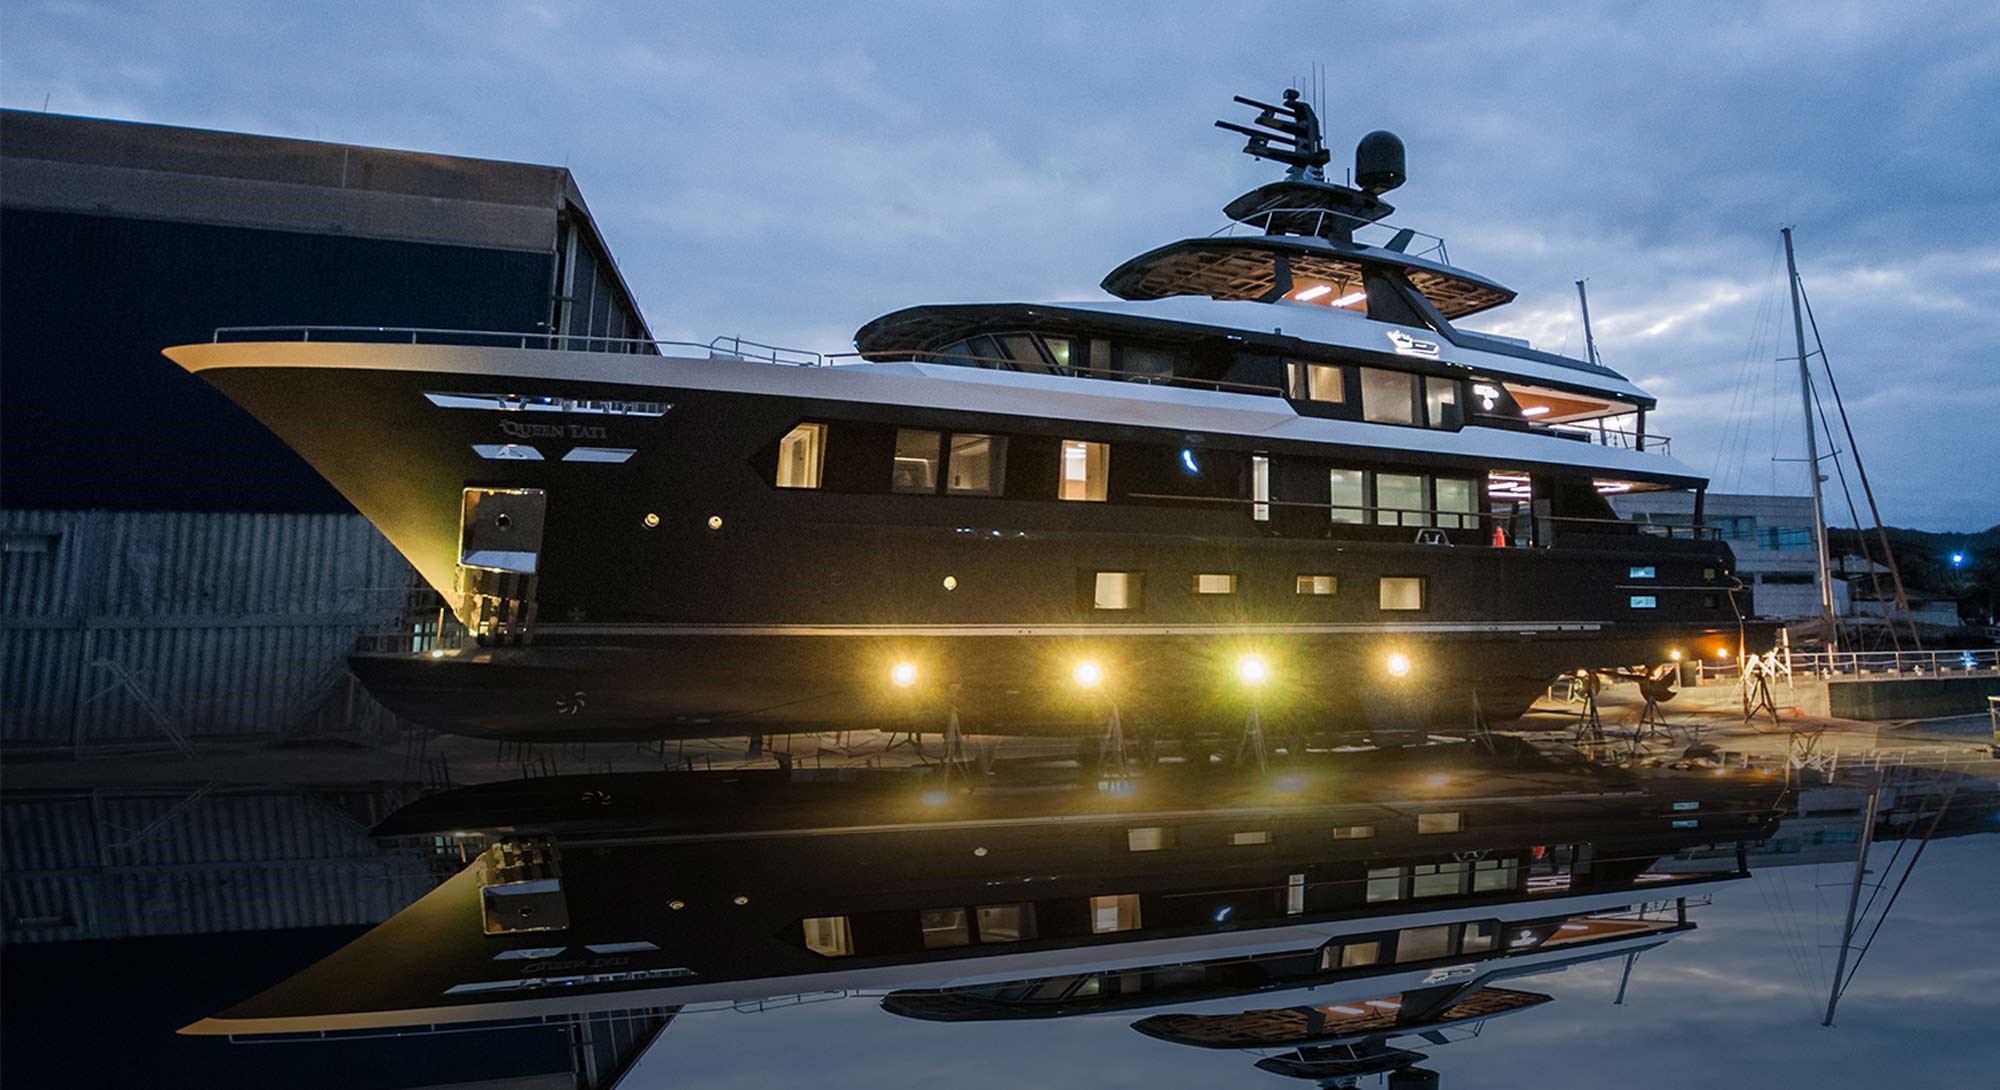 MCP Yachts launches its second largest all-aluminium superyacht Queen Tati